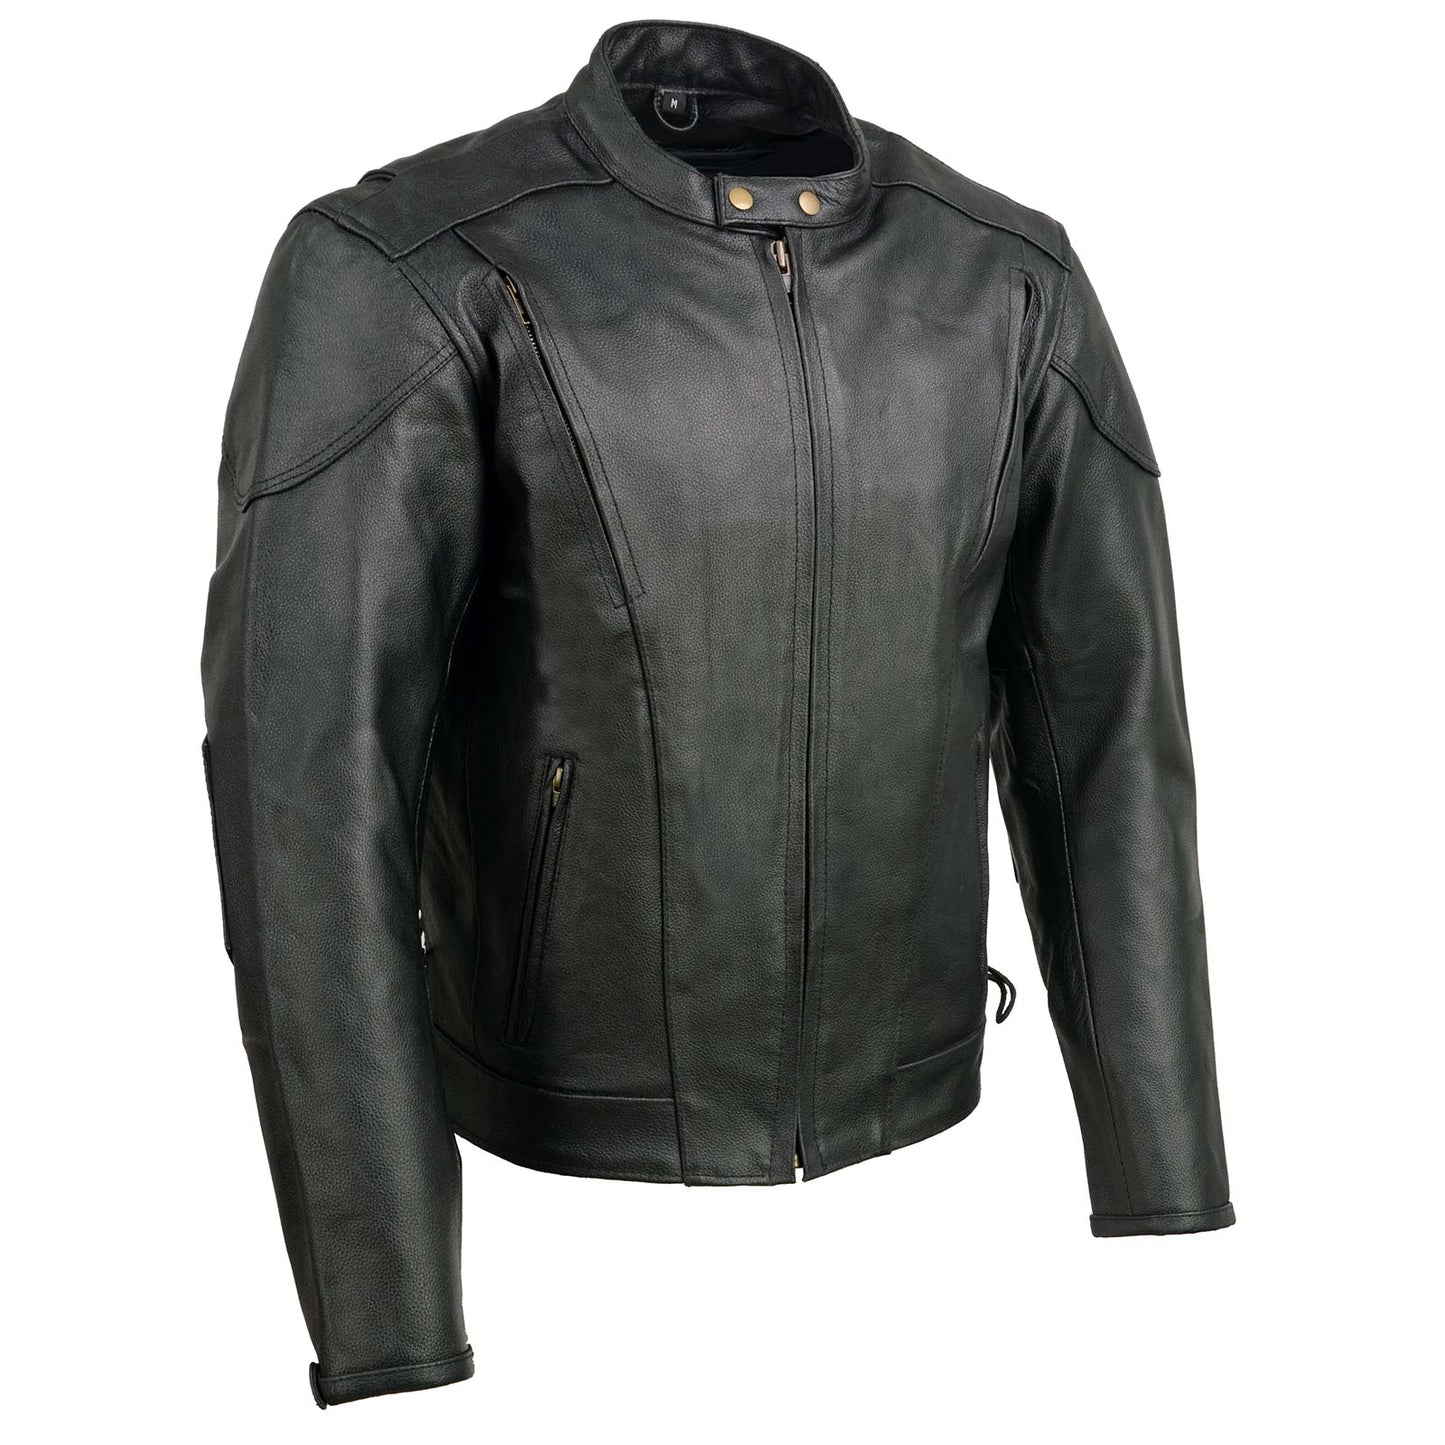 Event Leather EL5410 Men's Black Side Lace Scooter Jacket with Vents - Motorcycle Riding Jackets